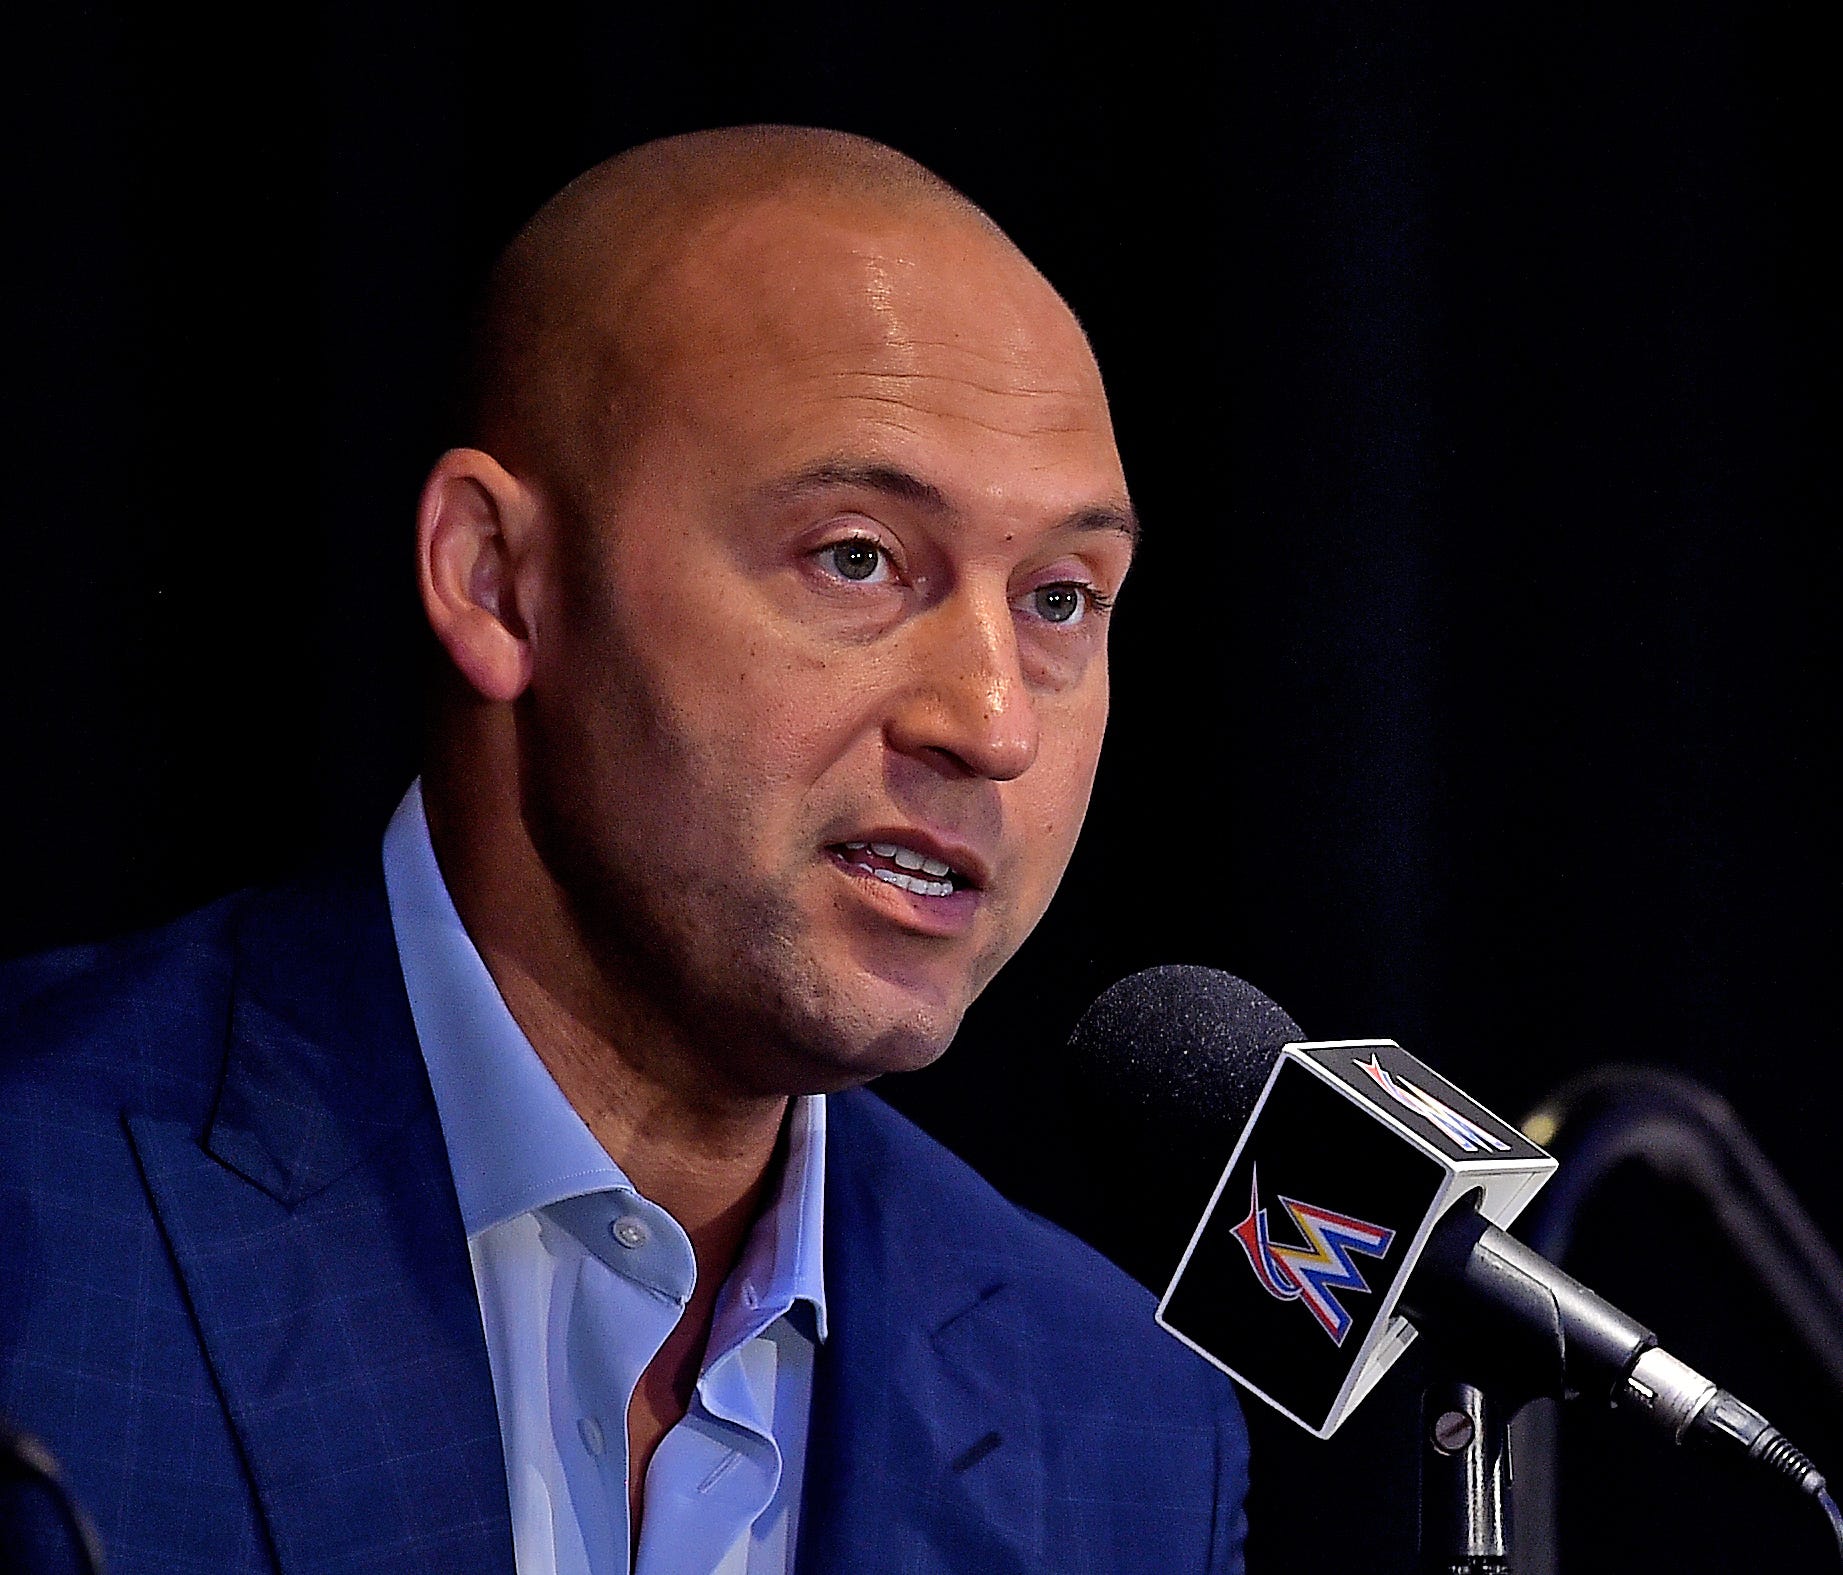 Derek Jeter addresses the media at Marlins Park in Miami after being introduced as Marlins chief executive officer on Oct. 3.